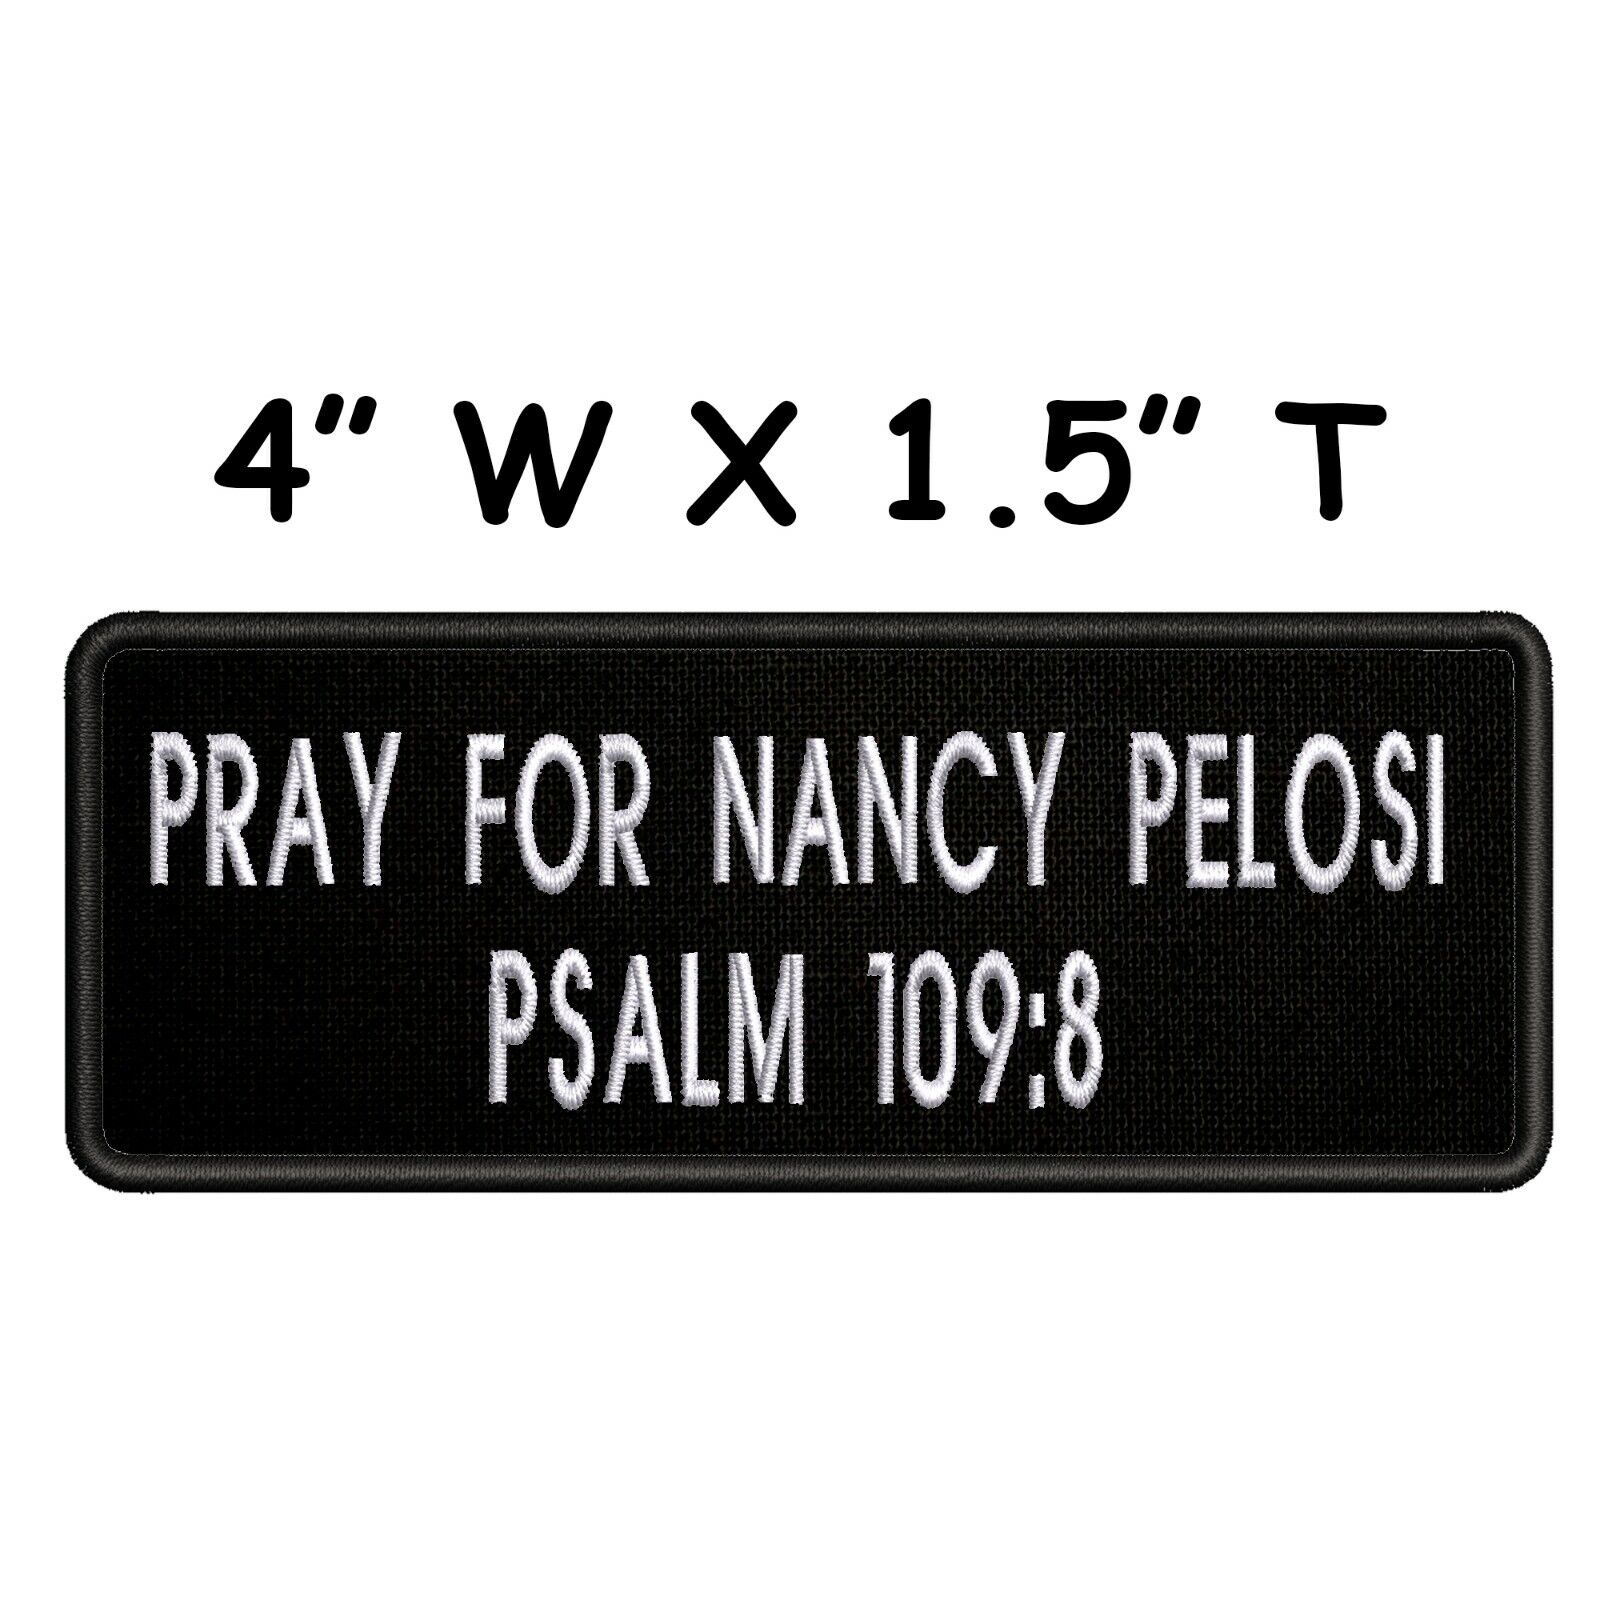 Pray for Nancy Pelosi Psalm 109:8 Embroidered Patch Iron-on/Sew-on Humor Funny